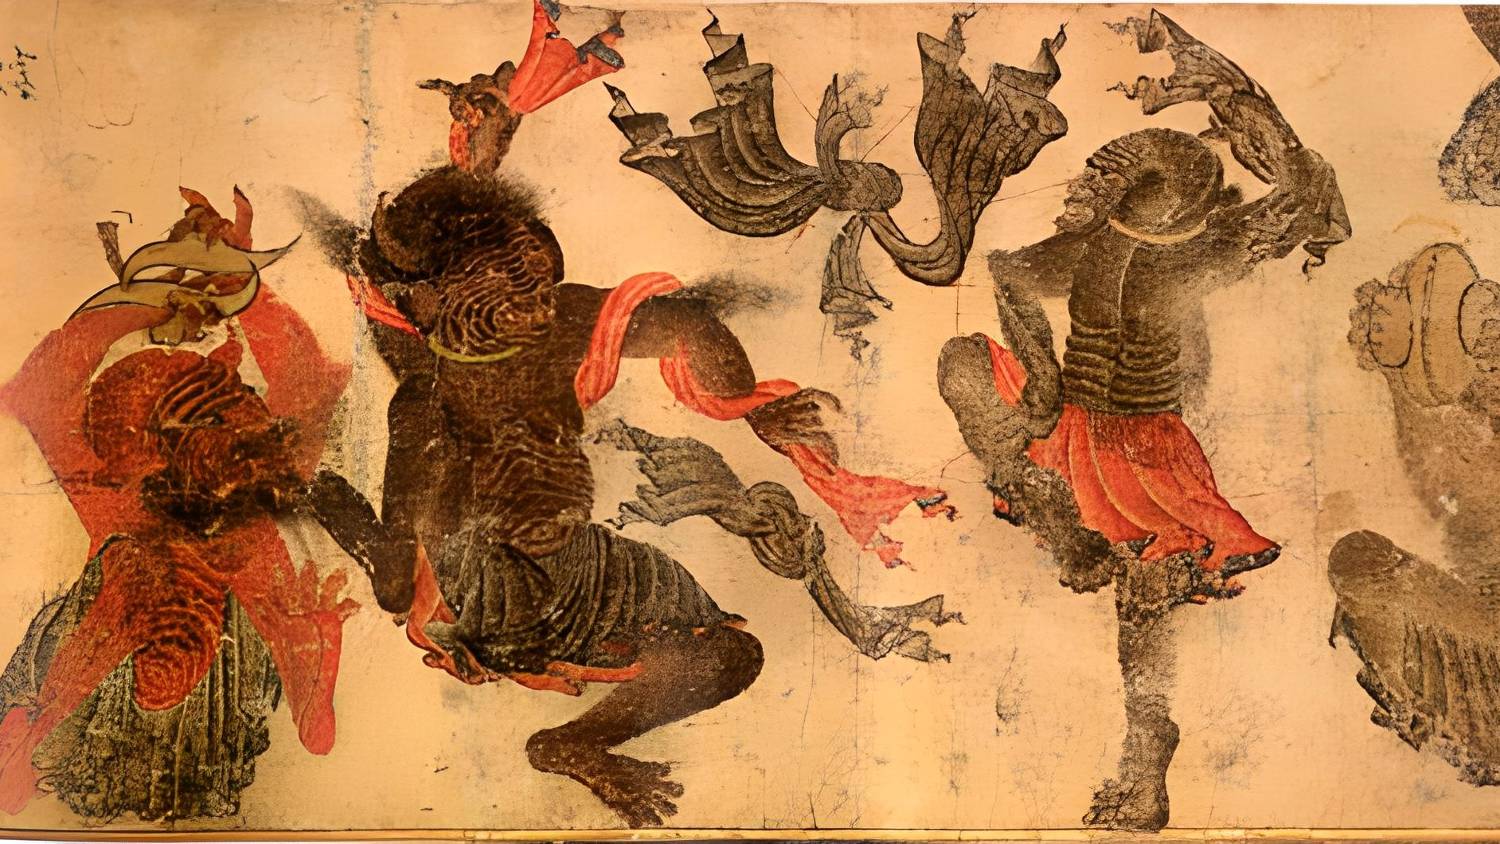 Paintings from the late 14th and early 15th century usually depict the jinn as demonic creatures (Topkapi Palace Museum Library, Public Domain)